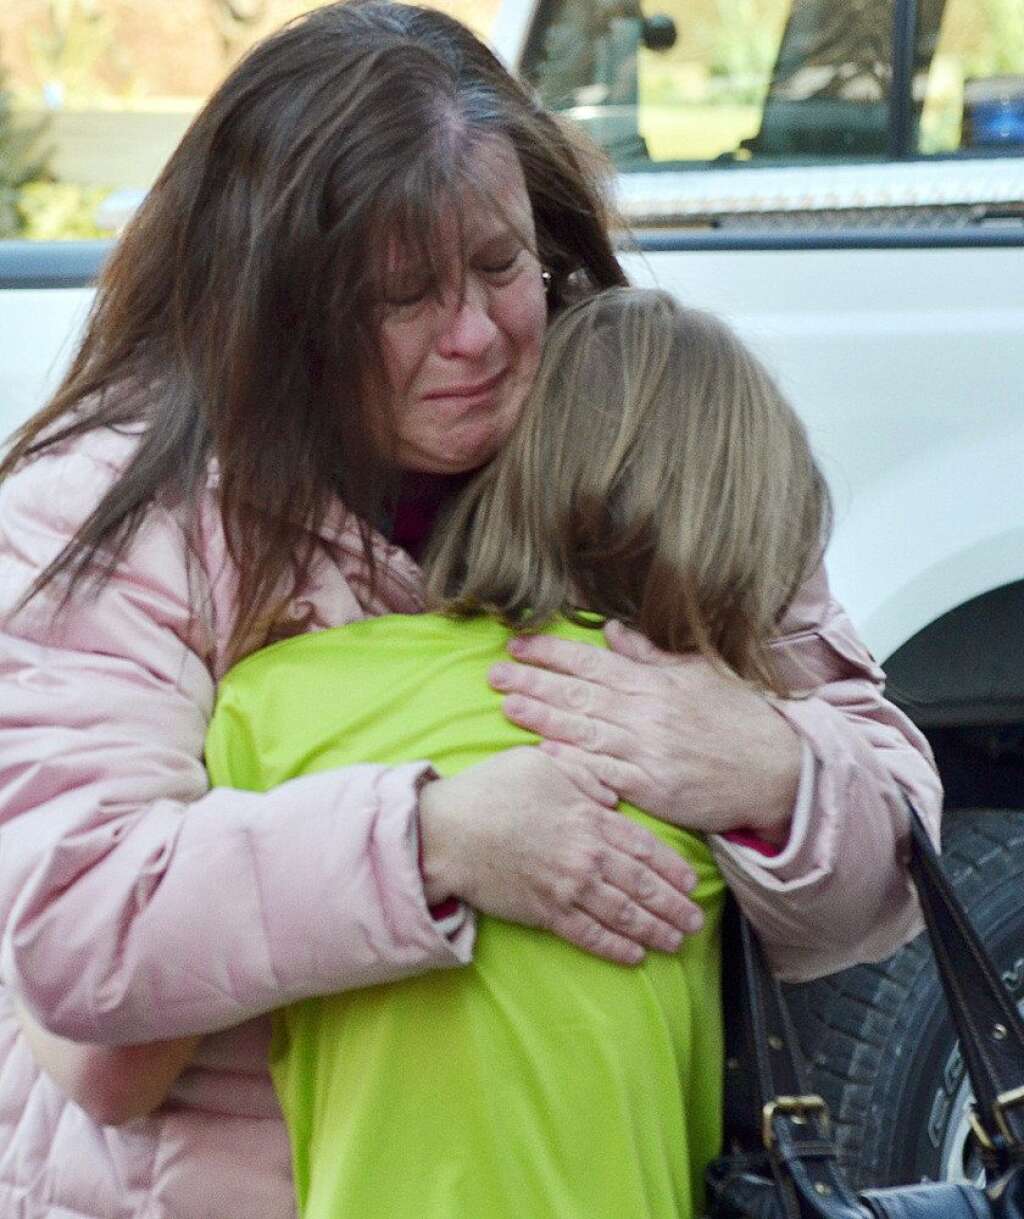 Sandy Hook Elementary School Shooting - A mother hugs her daughter following a shooting at the Sandy Hook Elementary School in Newtown, Conn., about 60 miles (96 kilometers) northeast of New York City, Friday, Dec. 14, 2012. A gunman entered the school Friday morning and killed at least 26 people, including 20 young children. (AP Photo/The New Haven Register, Melanie Stengel)